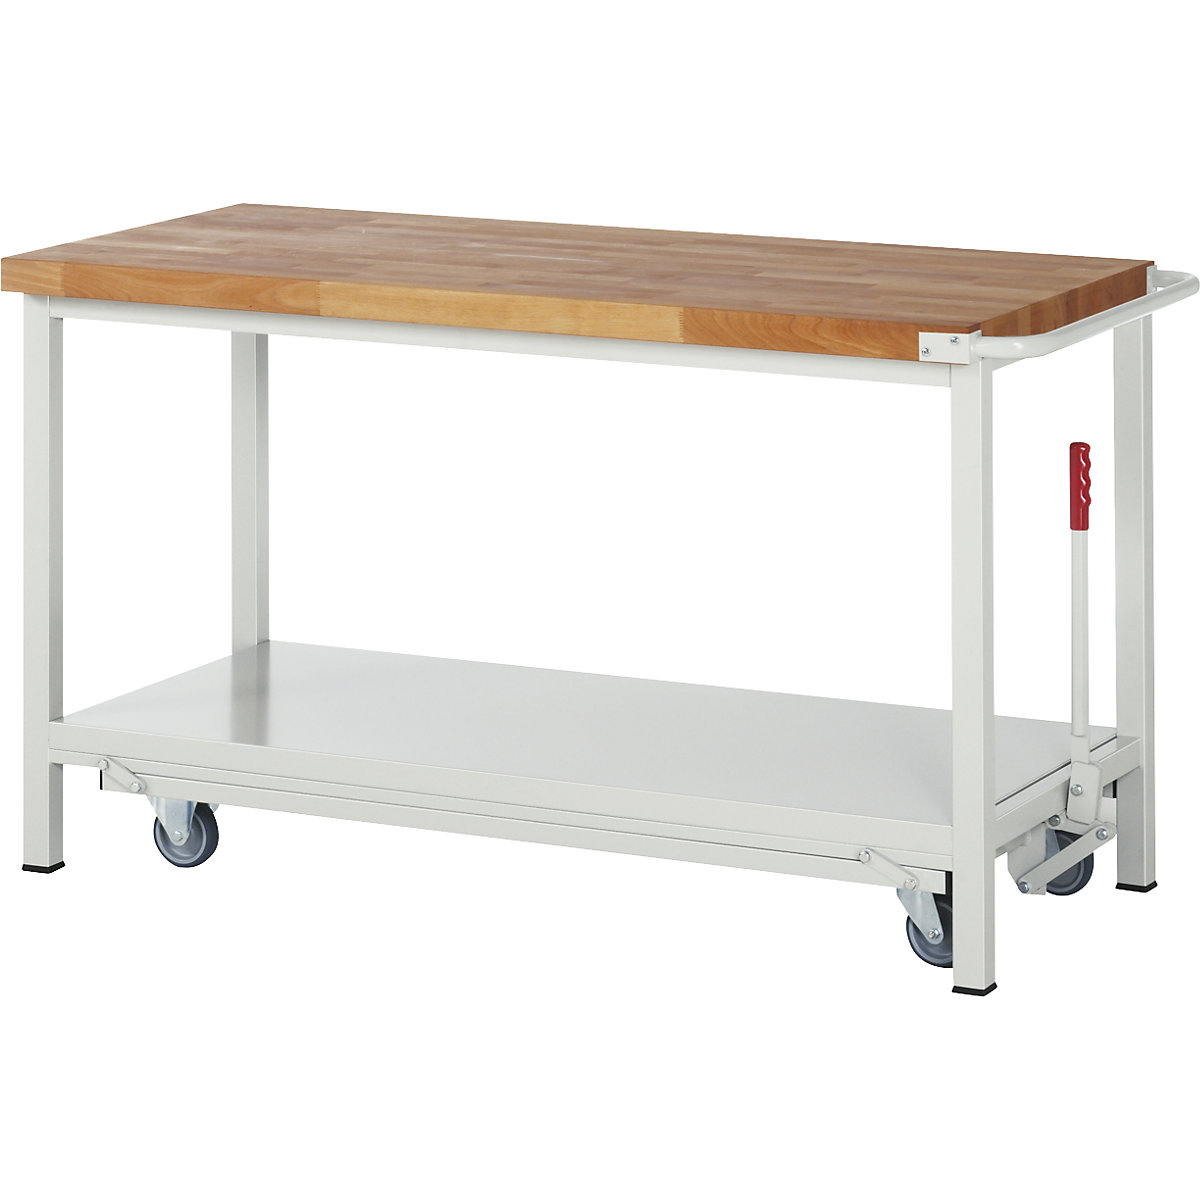 Mobile and lowerable workbench, Series 8 frame construction – eurokraft pro, 1 shelf, WxD 1500 x 700 mm-2